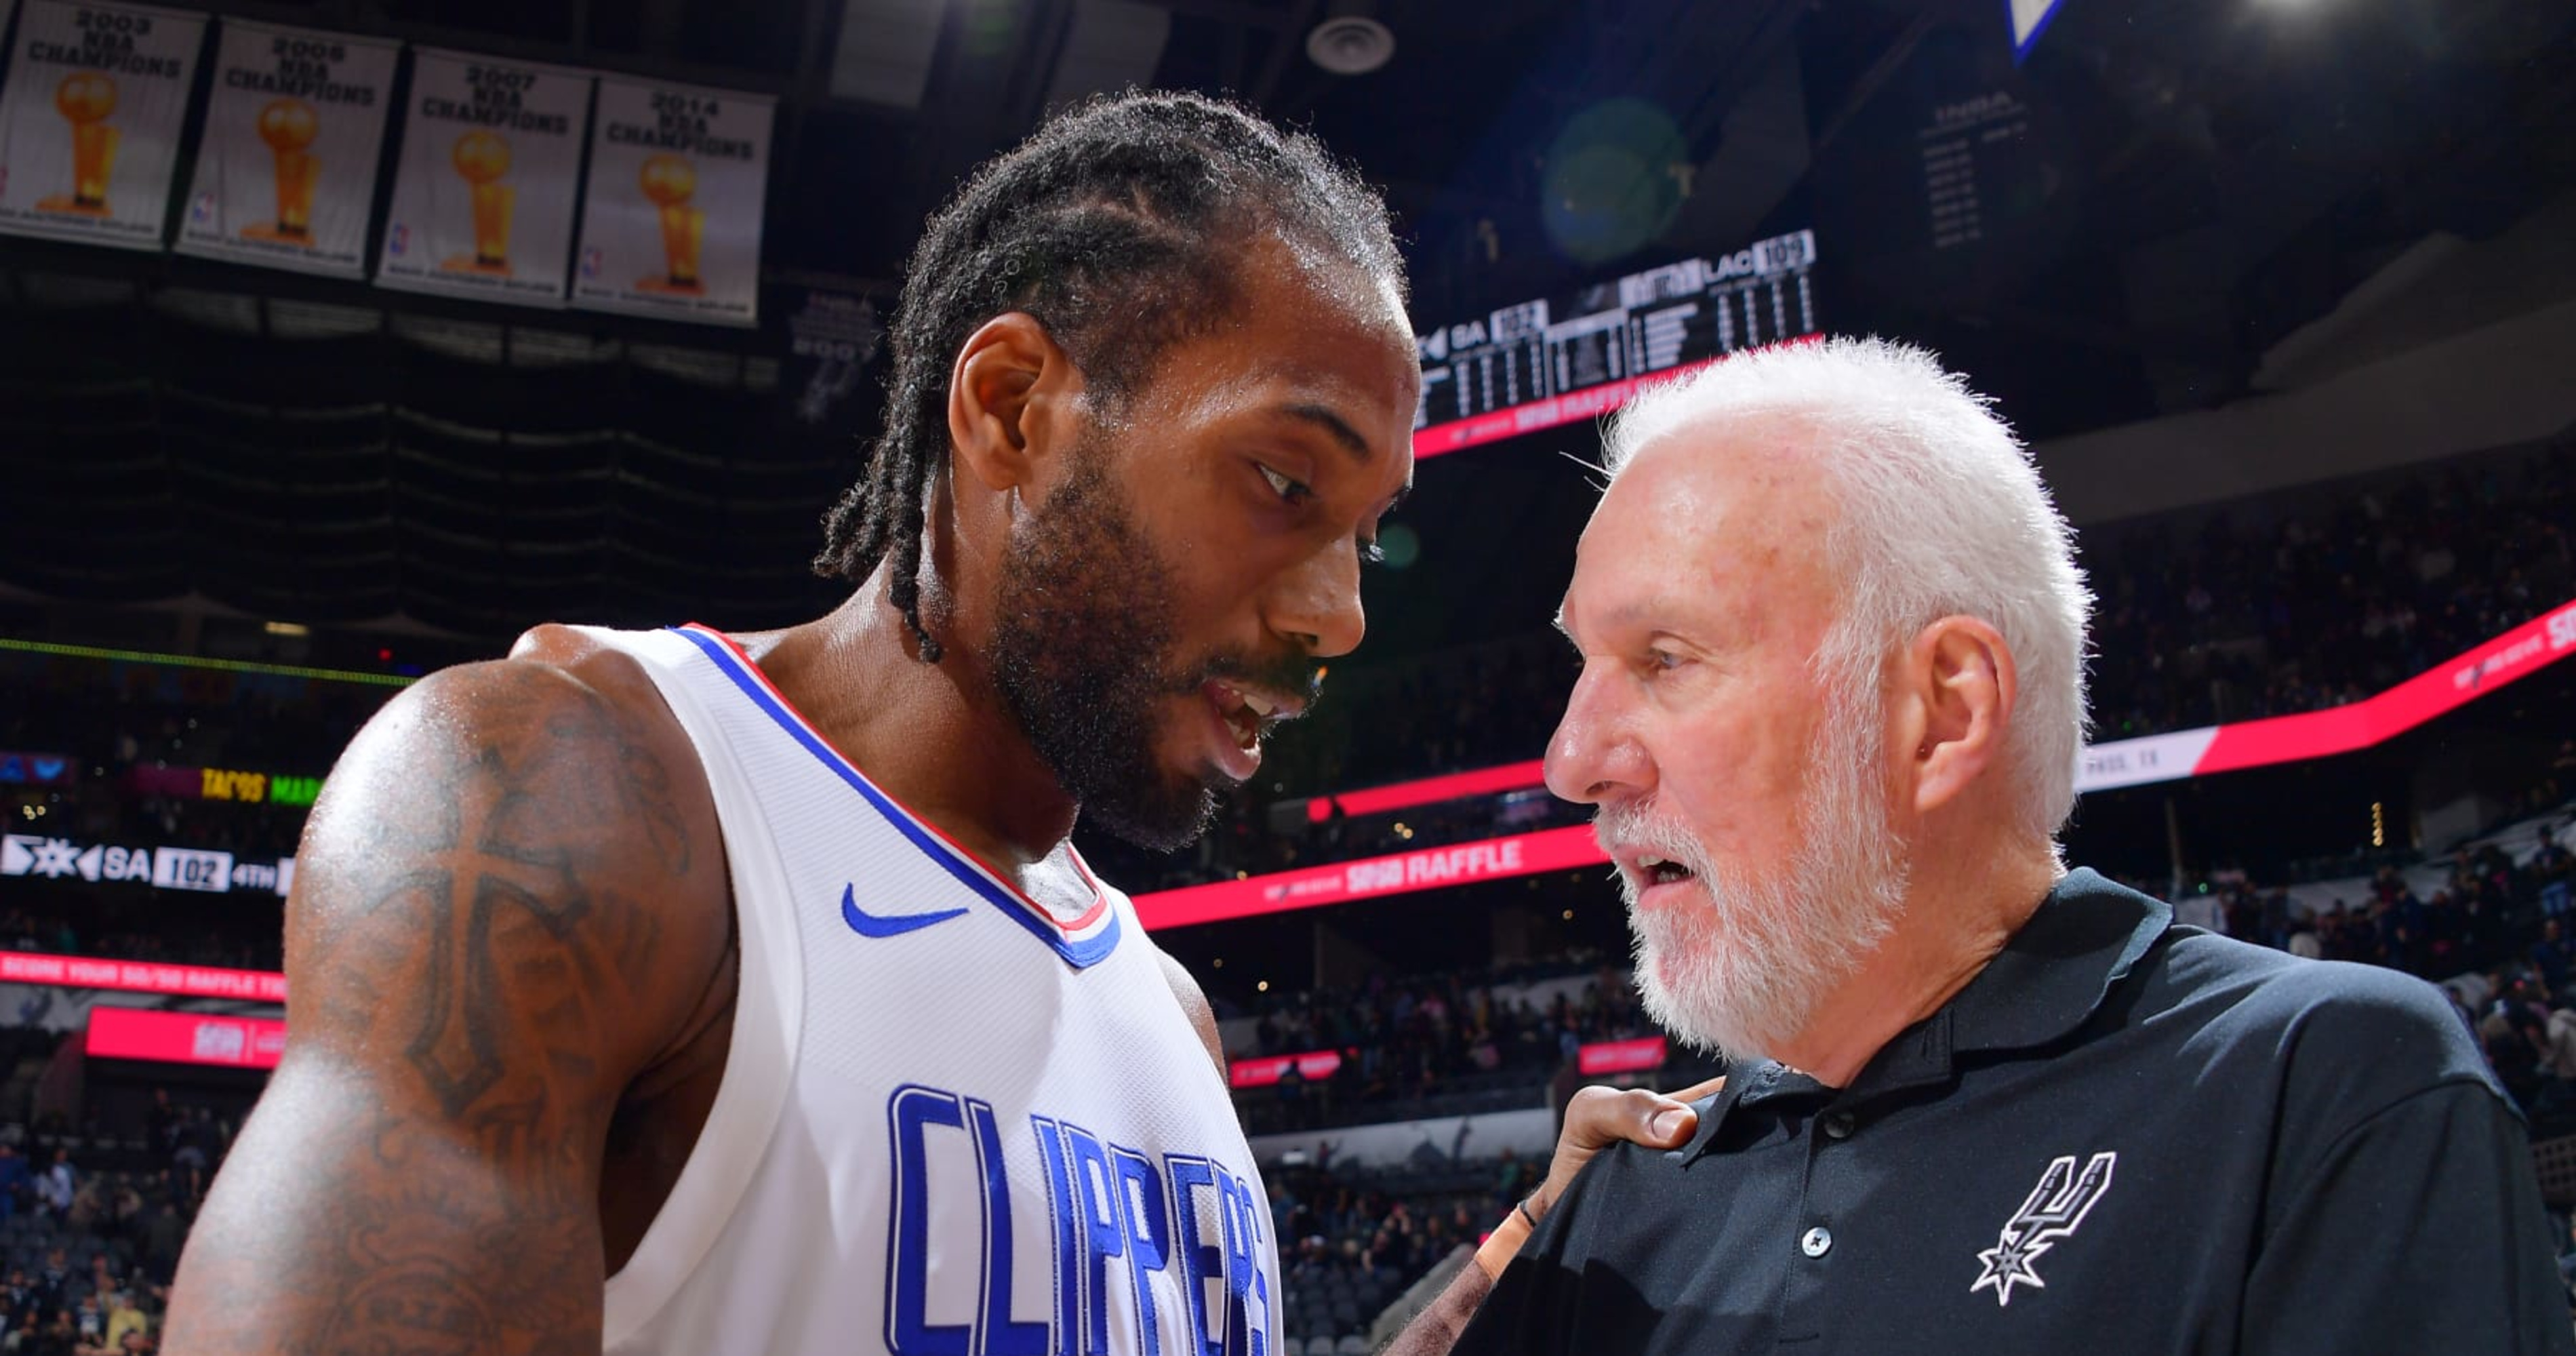 Gregg Popovich on Telling Spurs Crowd Not to Boo Kawhi: 'You Don't Poke the Bear'